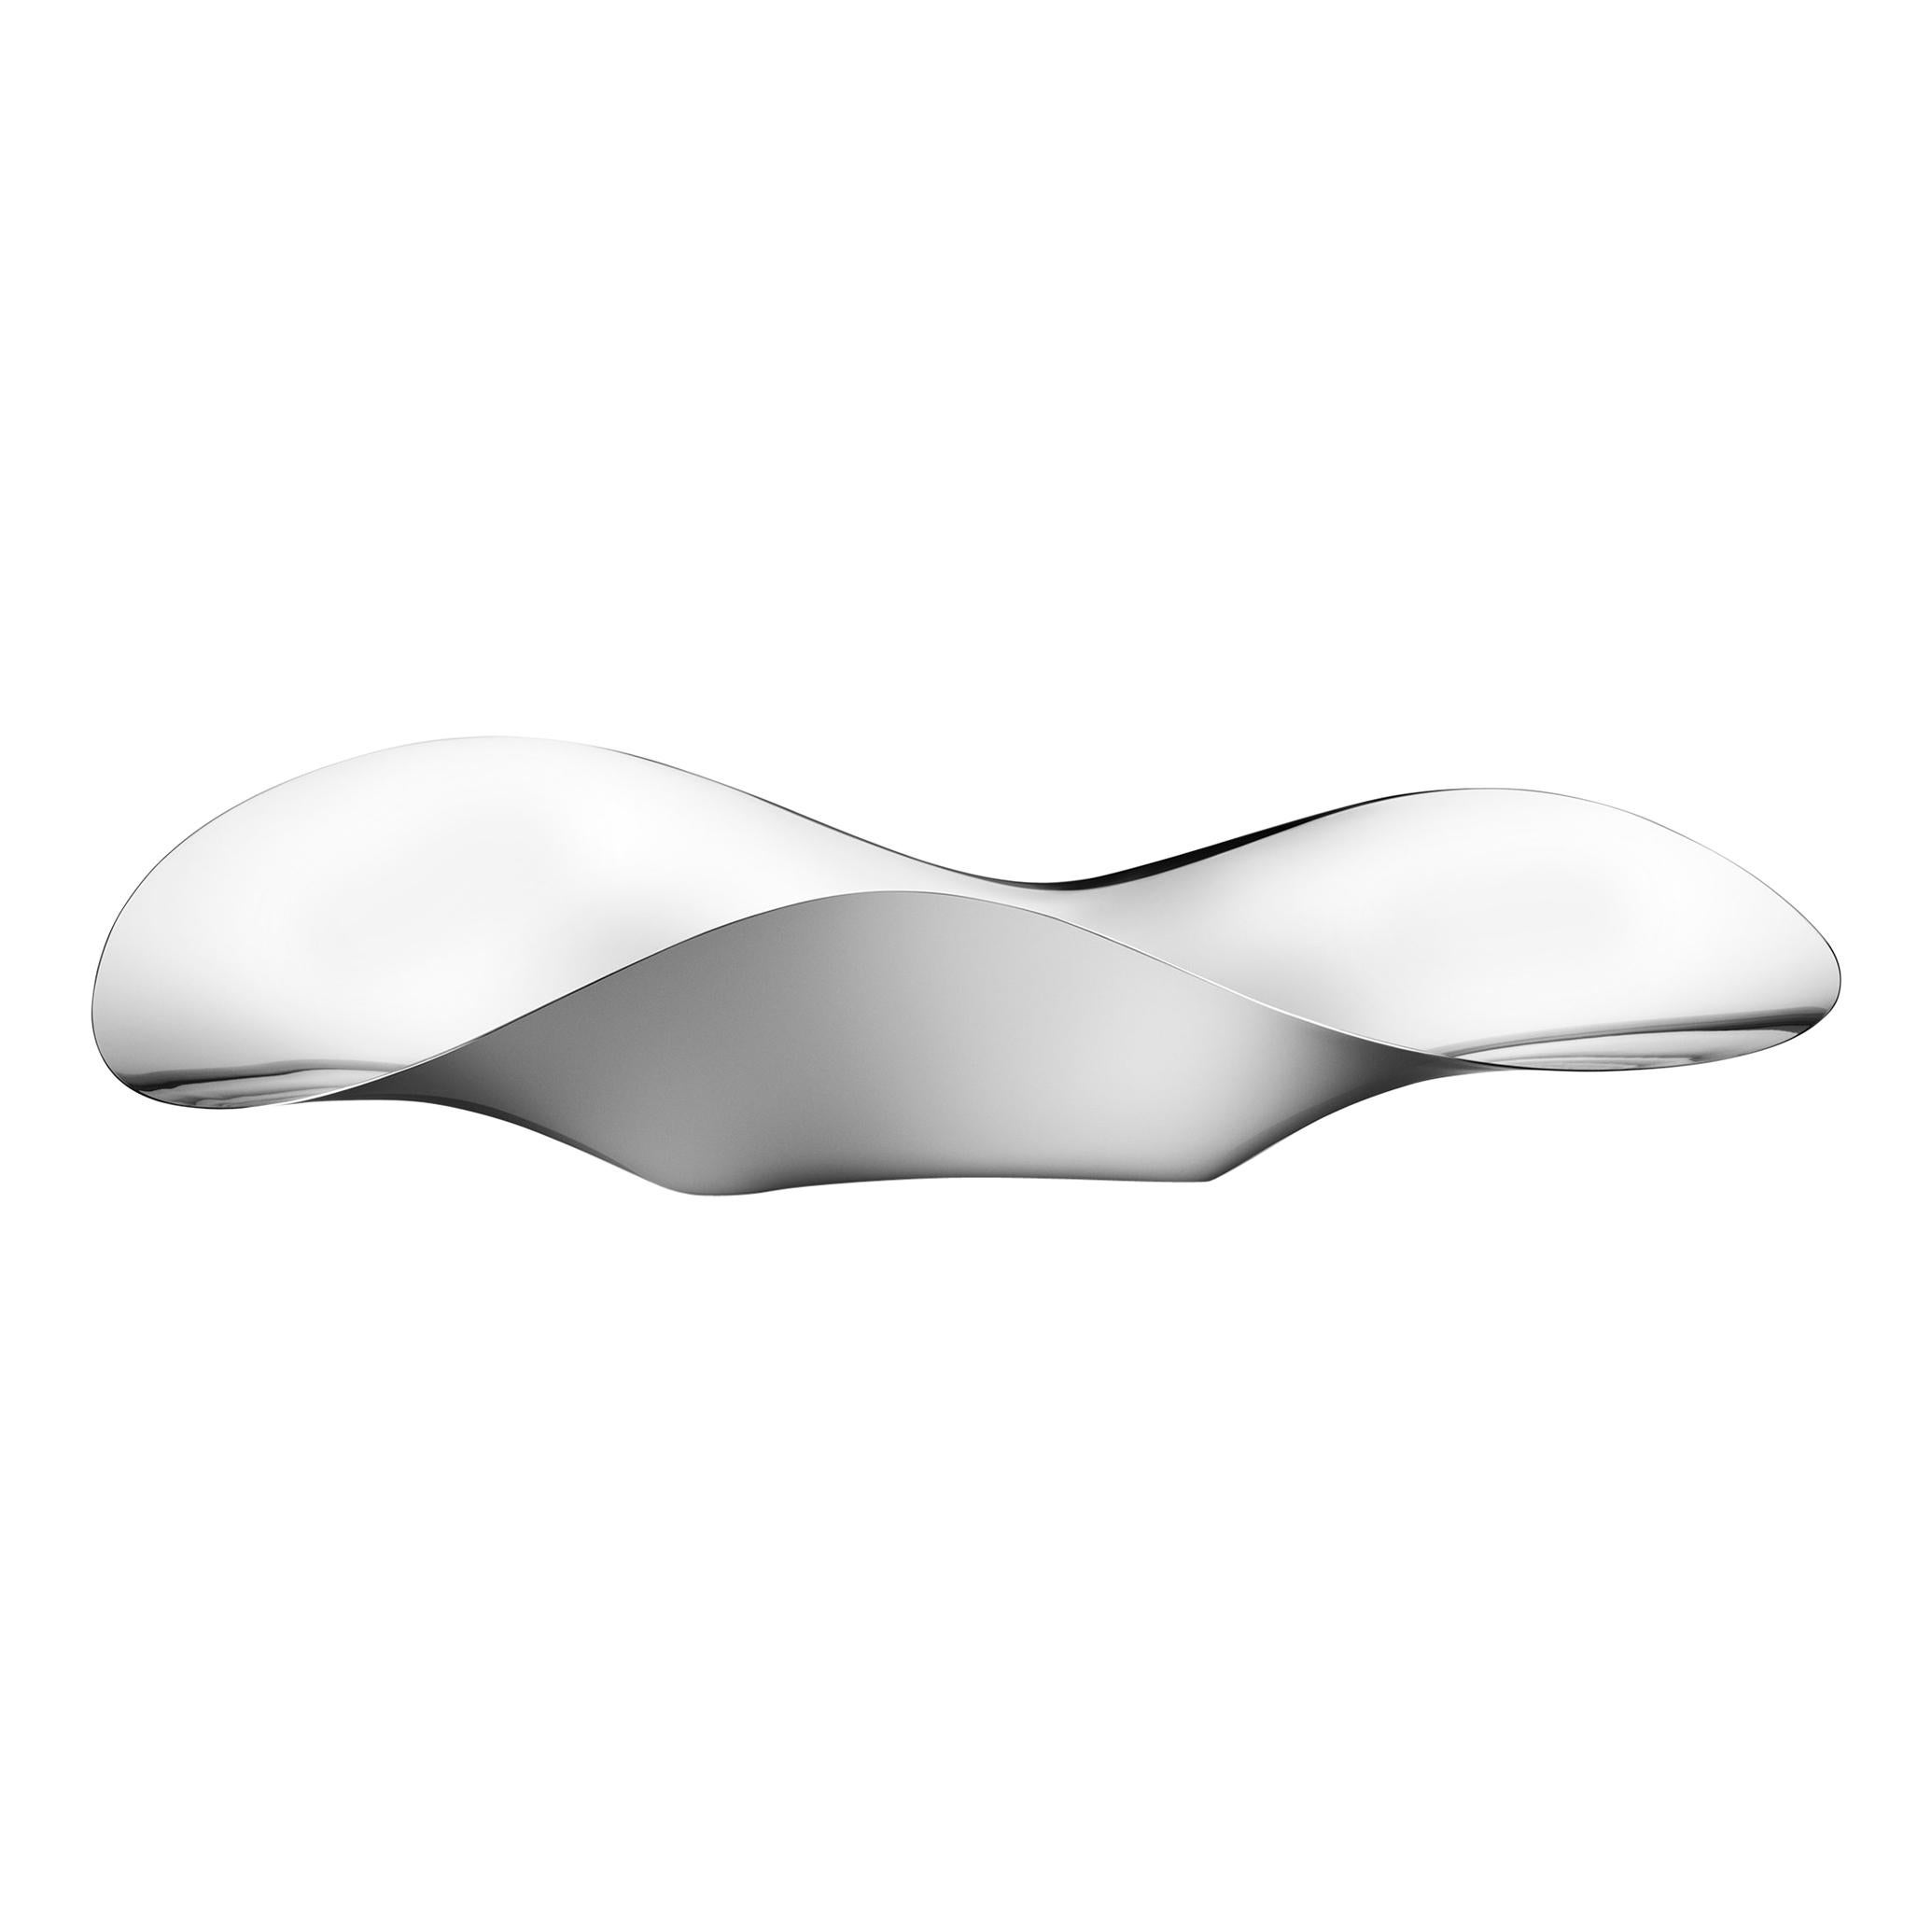 Georg Jensen Indulgence Oyster Tray in Stainless Steel by Helle Damkjær